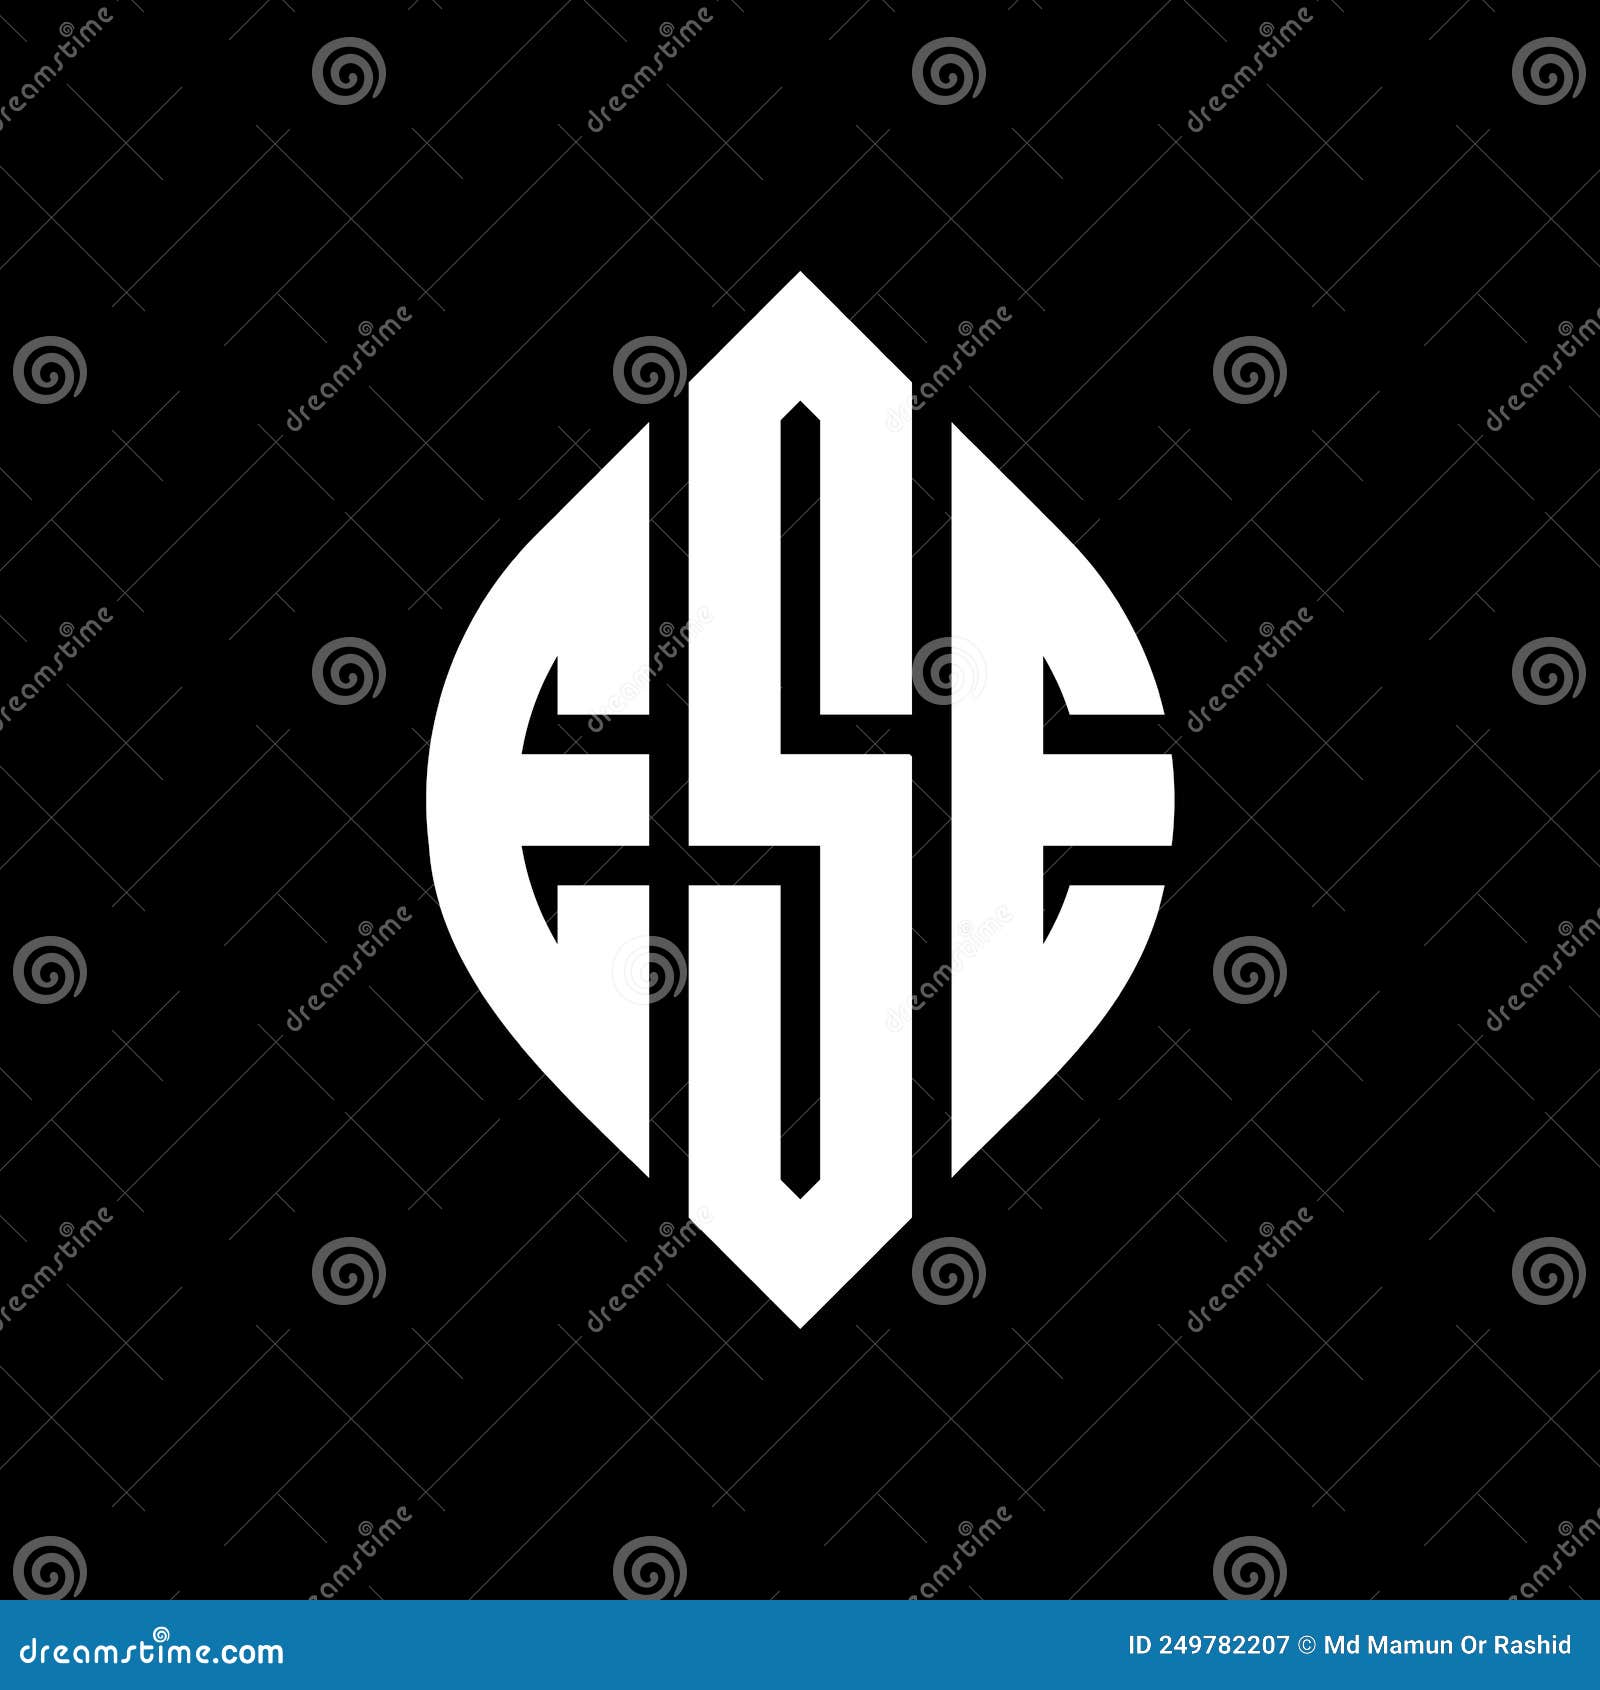 ese circle letter logo  with circle and ellipse . ese ellipse letters with typographic style. the three initials form a